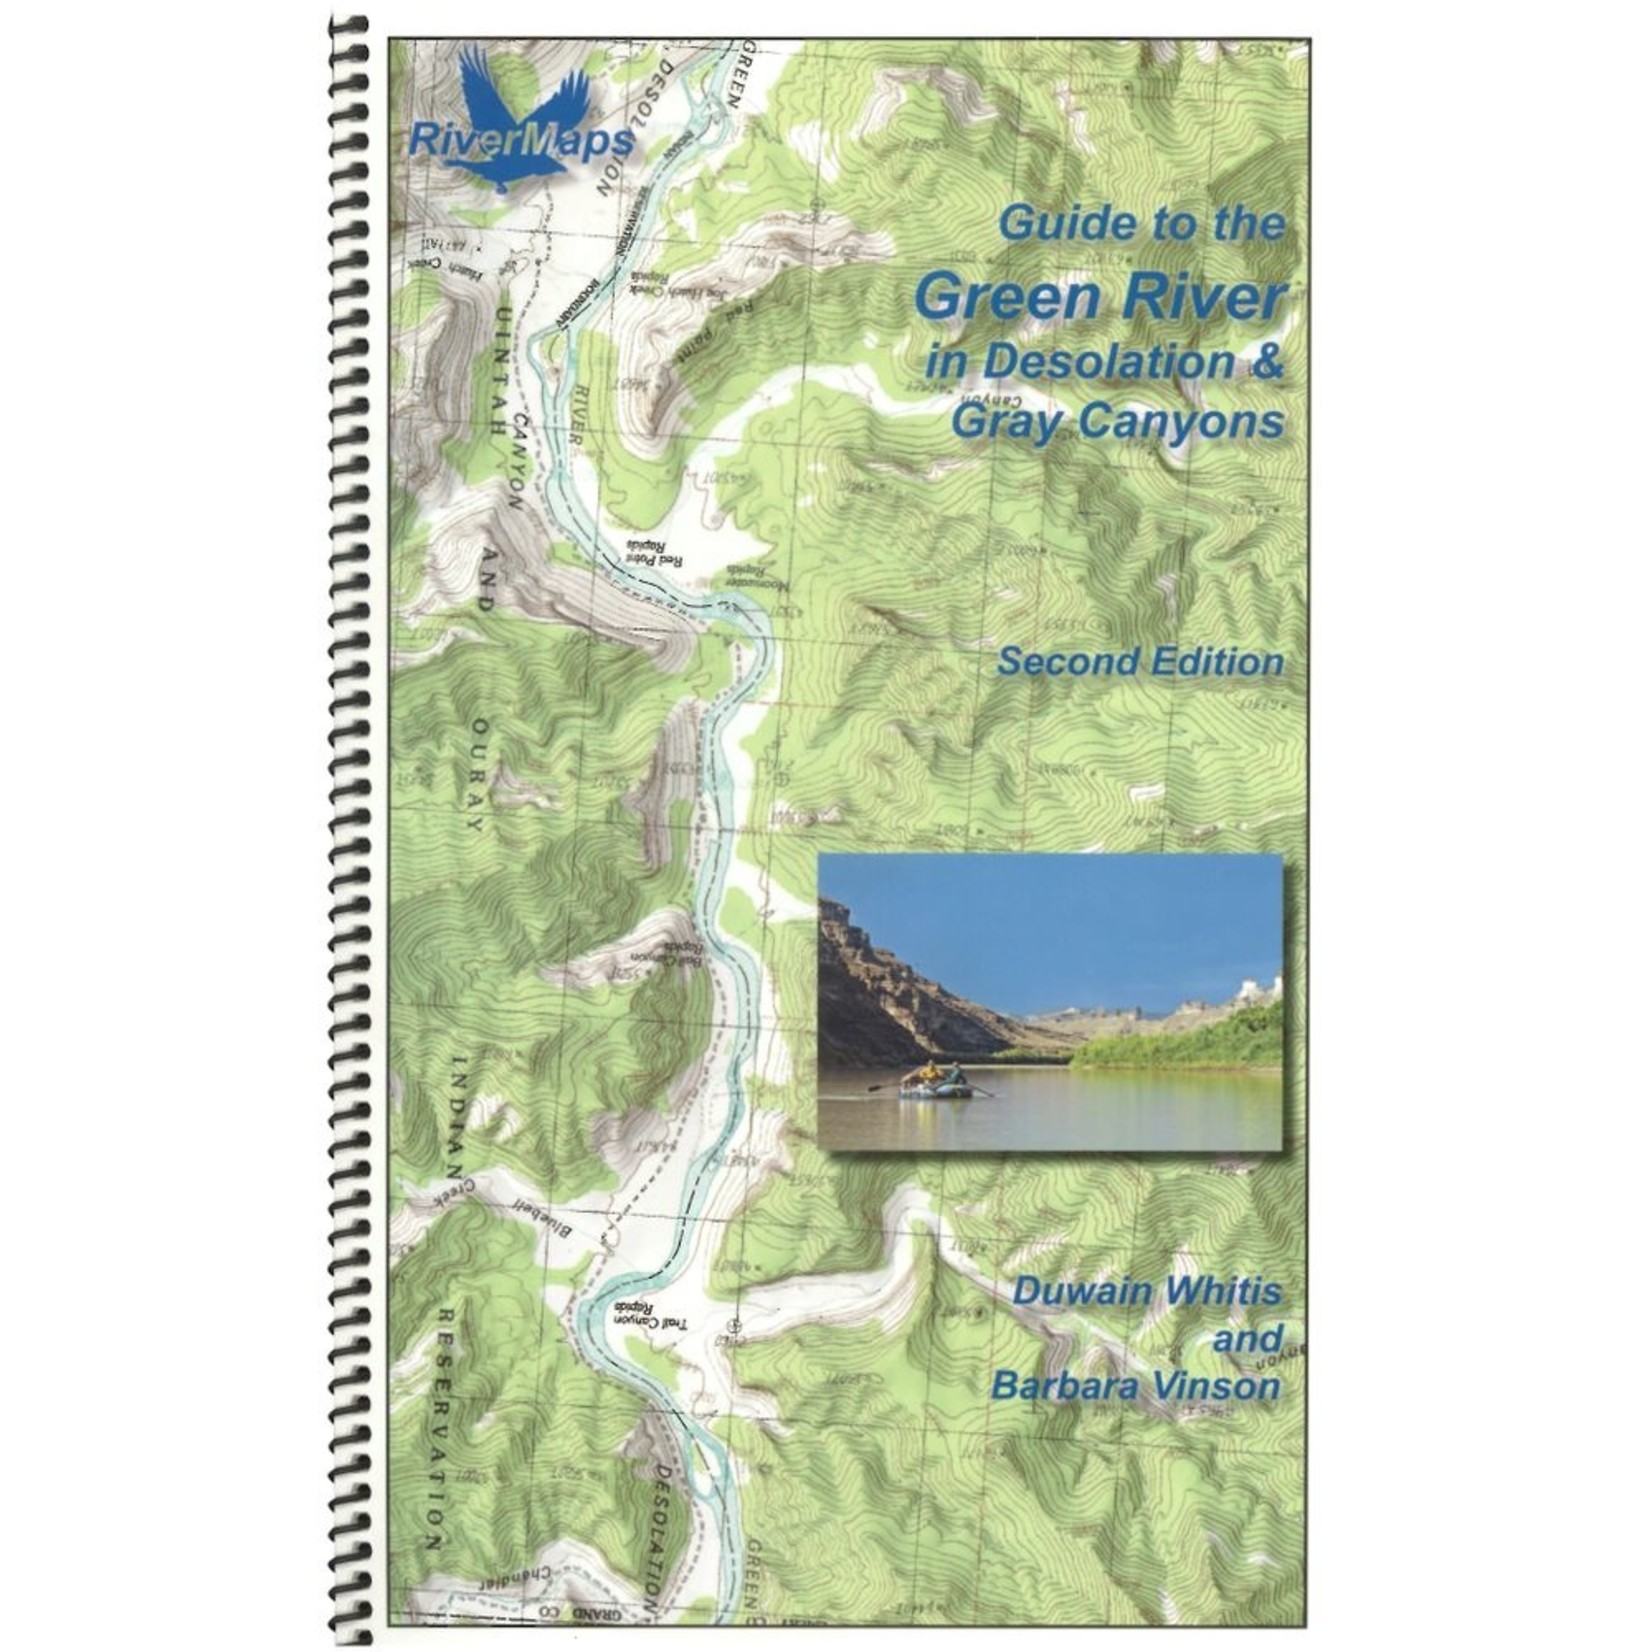 Rivermaps RiverMaps Green River in Desolation & Gray Canyons Guide Book